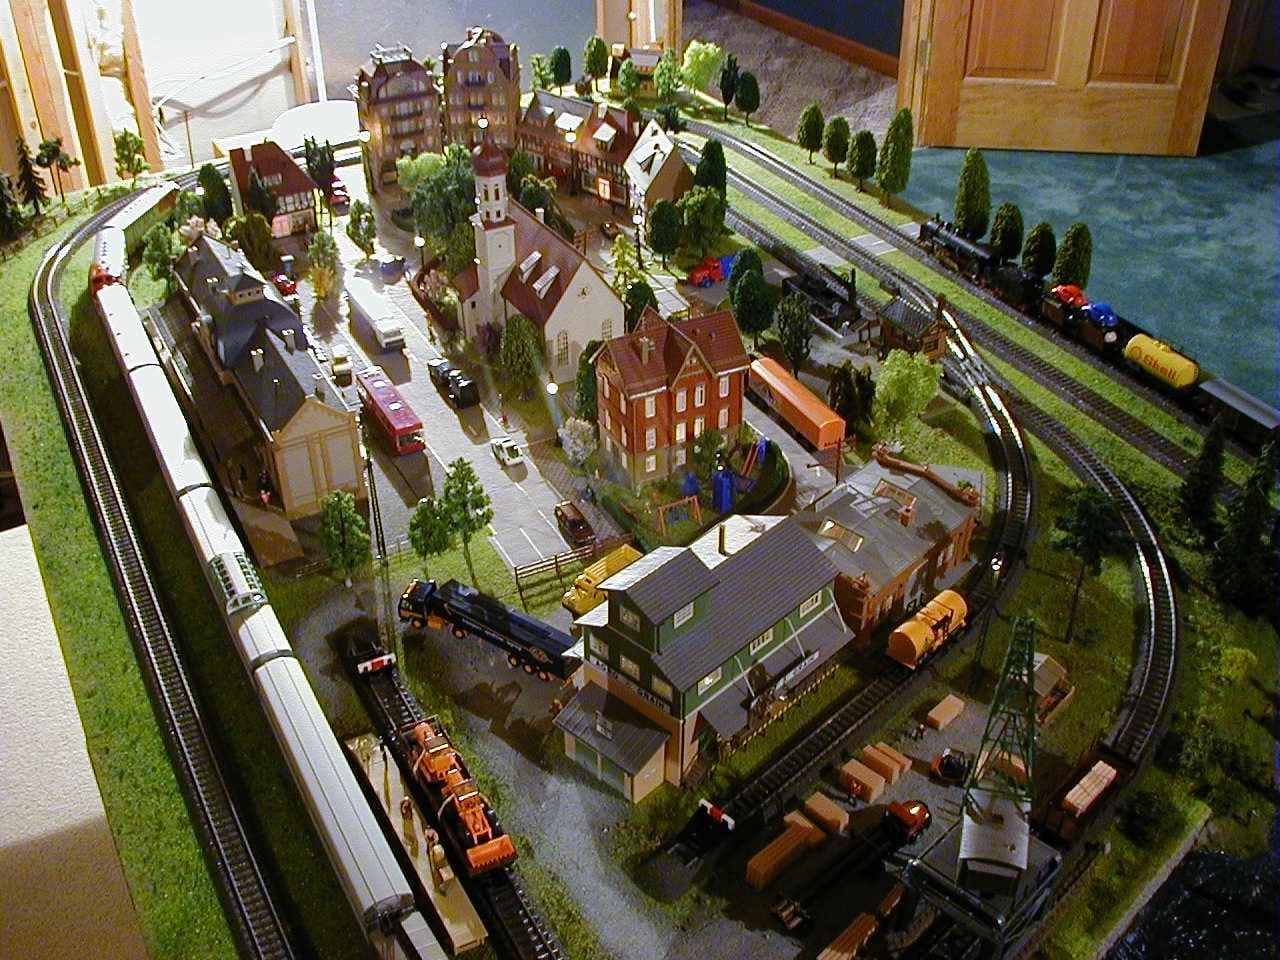 small ho scale layouts